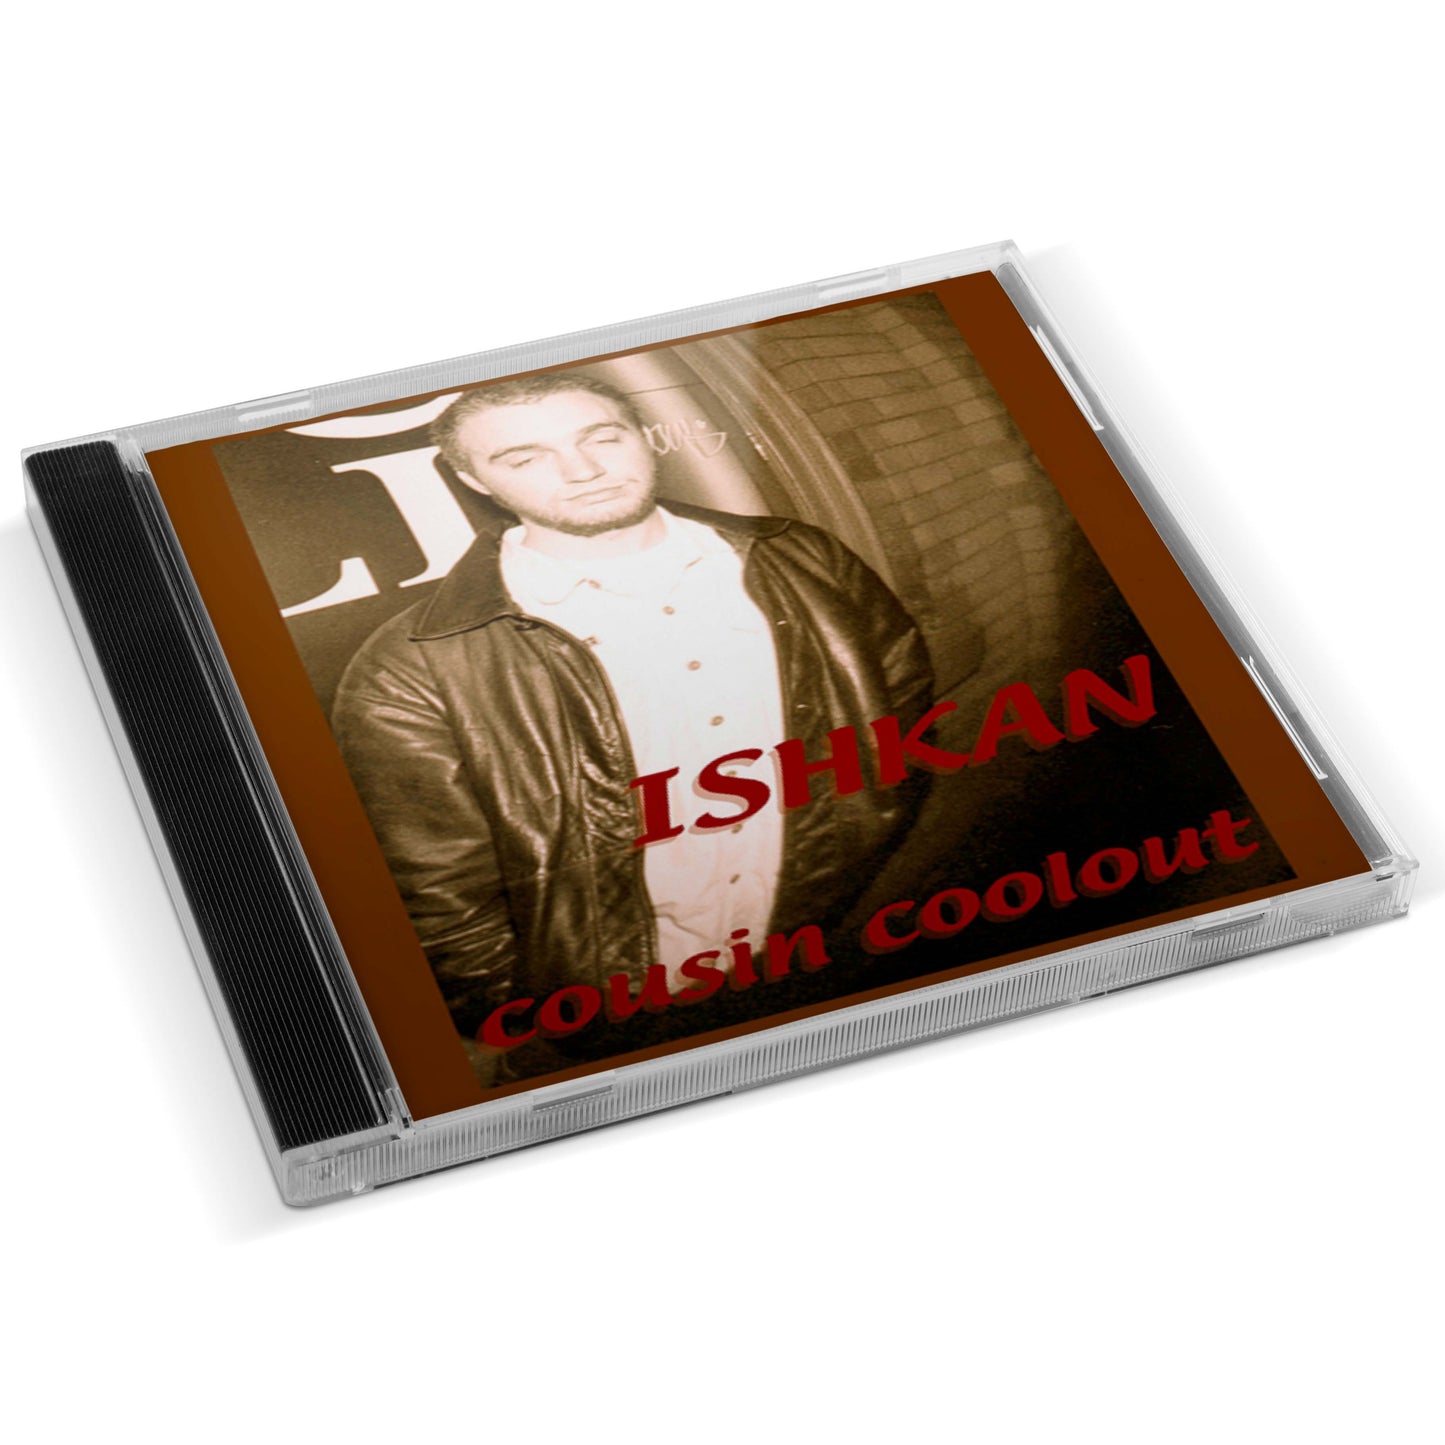 Ishkan - Cousin Coolout CD